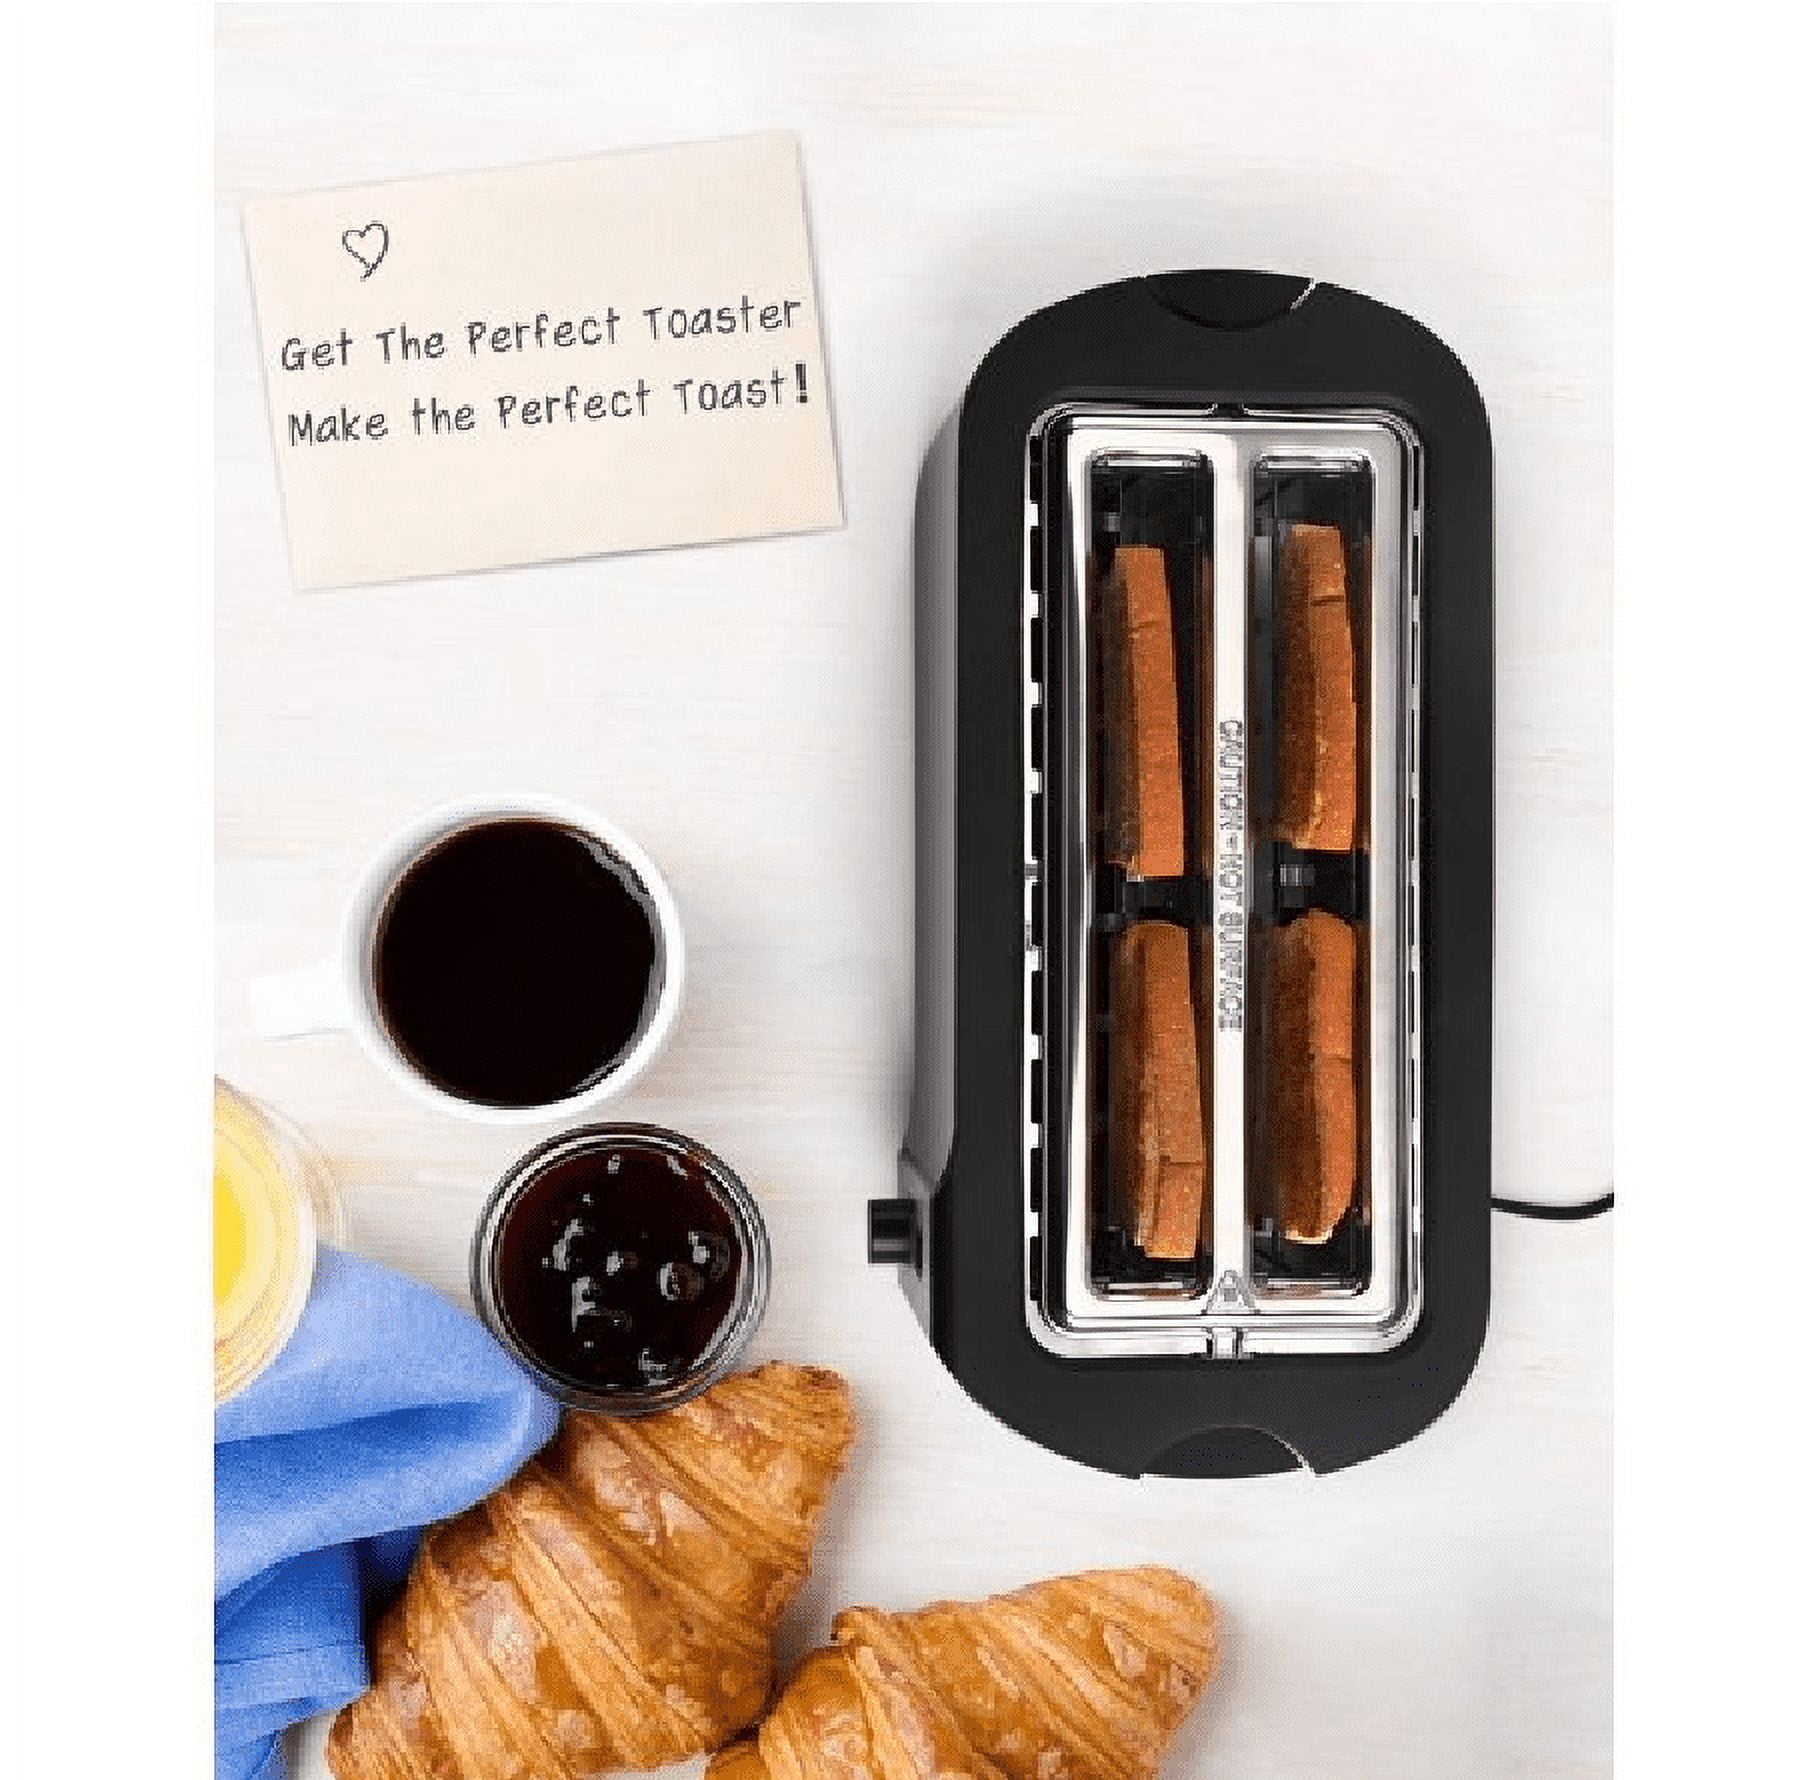 IKICH Long Slot Toaster review - The Gadgeteer